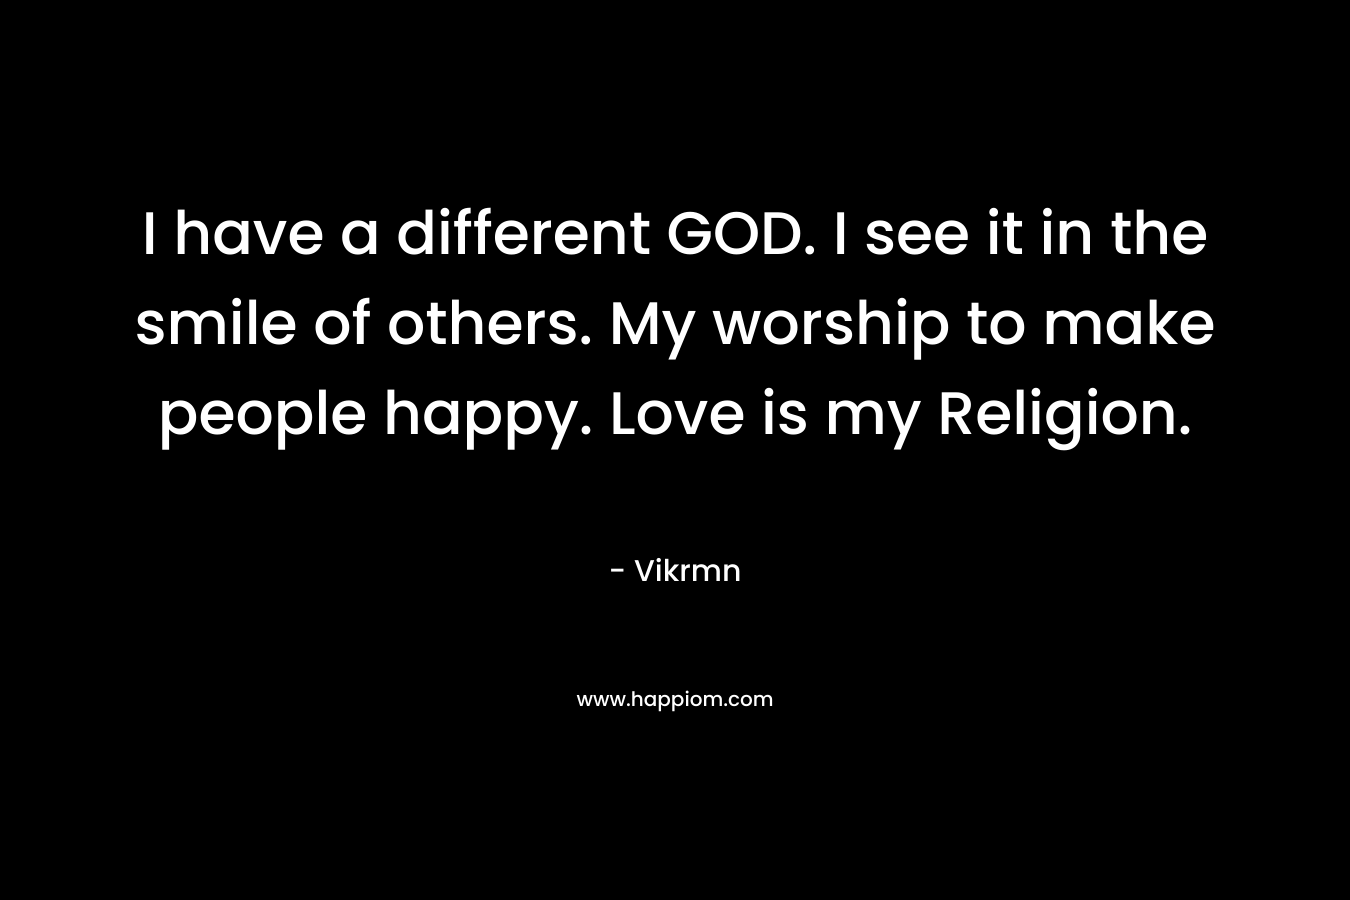 I have a different GOD. I see it in the smile of others. My worship to make people happy. Love is my Religion.